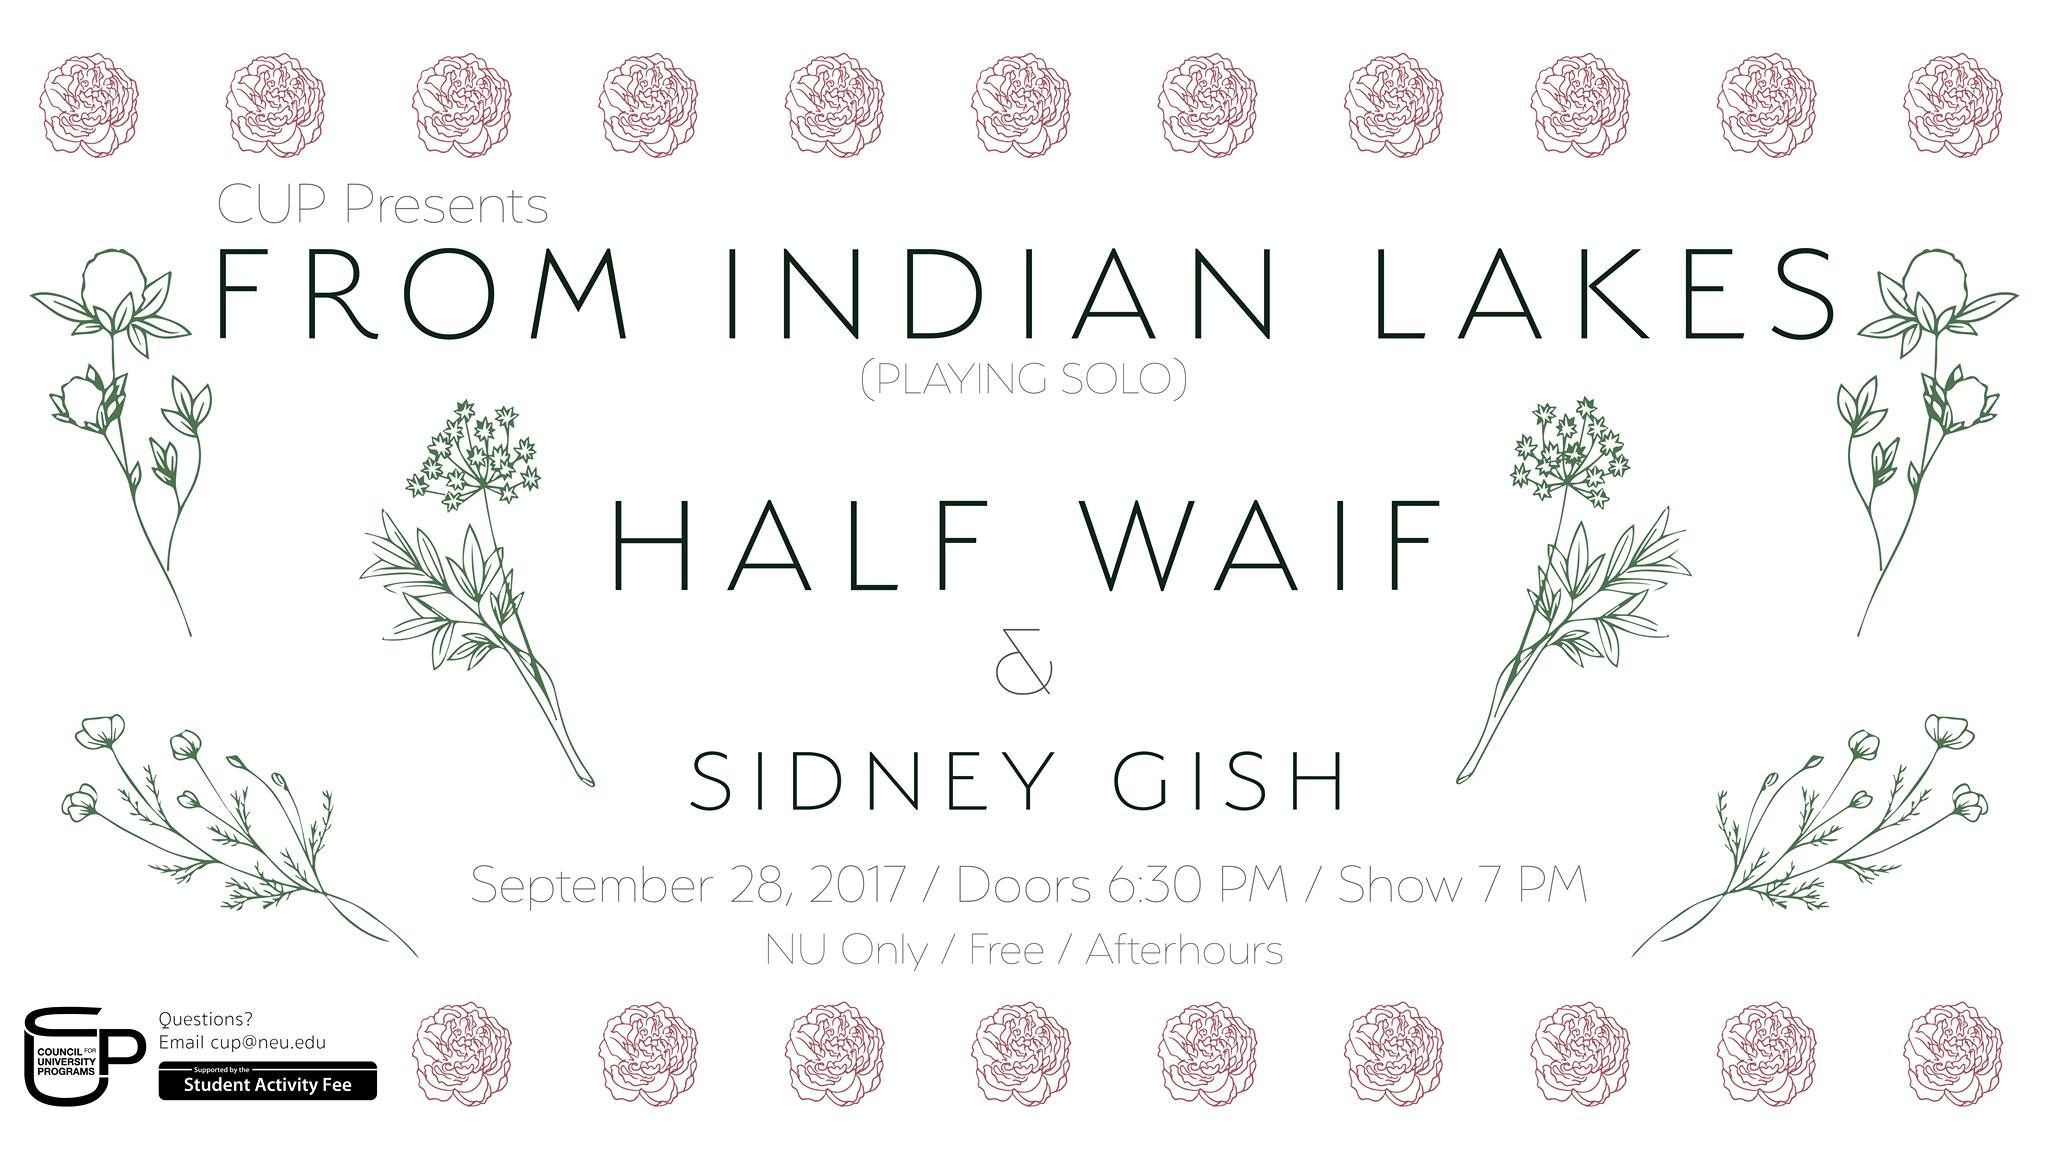 CUP Presents: From Indian Lakes, Half Waif, and Sidney Gish